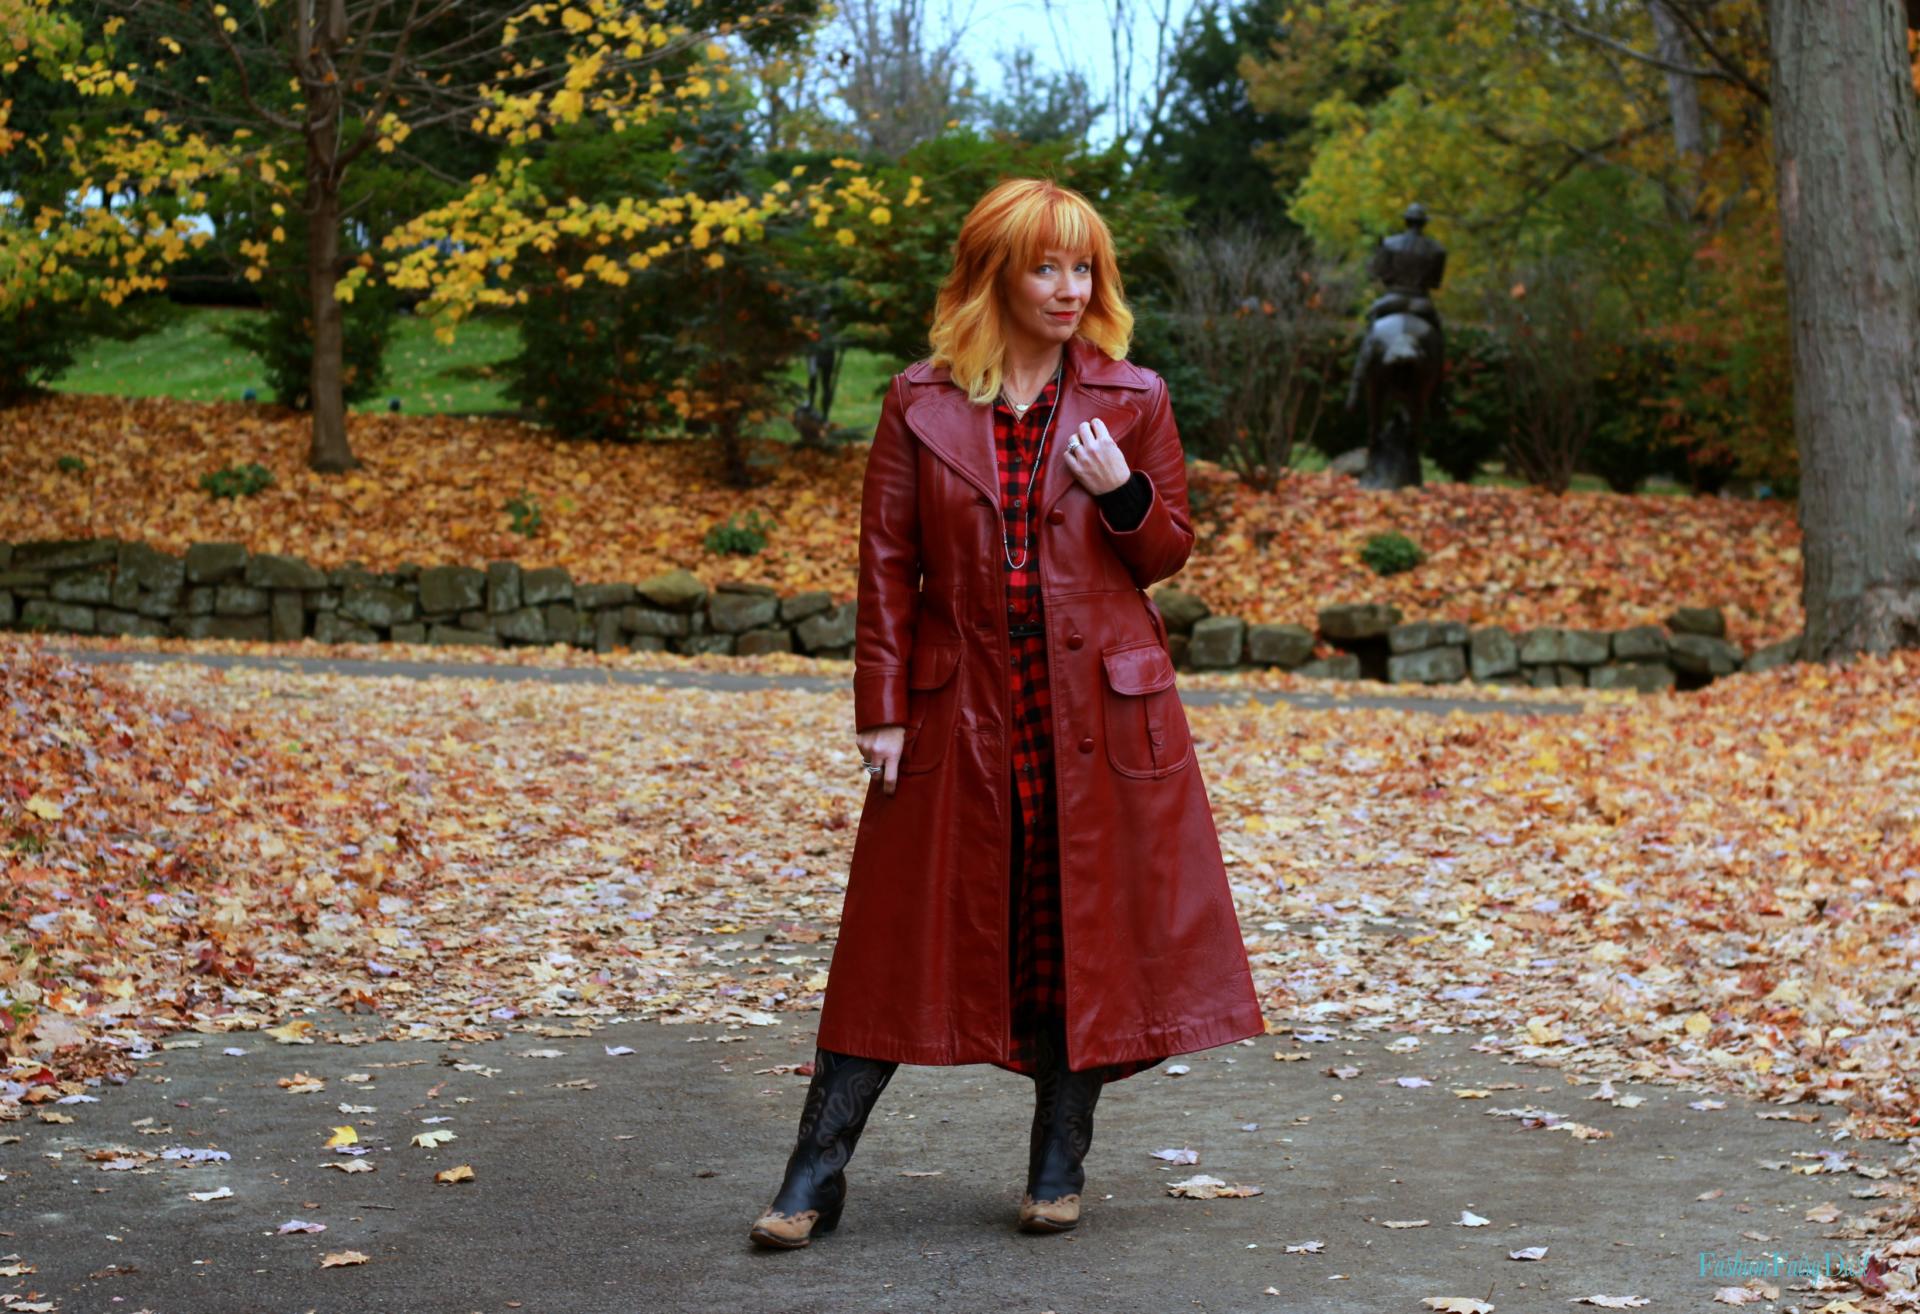 Vintage red leather coat, buffalo plaid duster, cowboy boots. Fall outfit ideas.